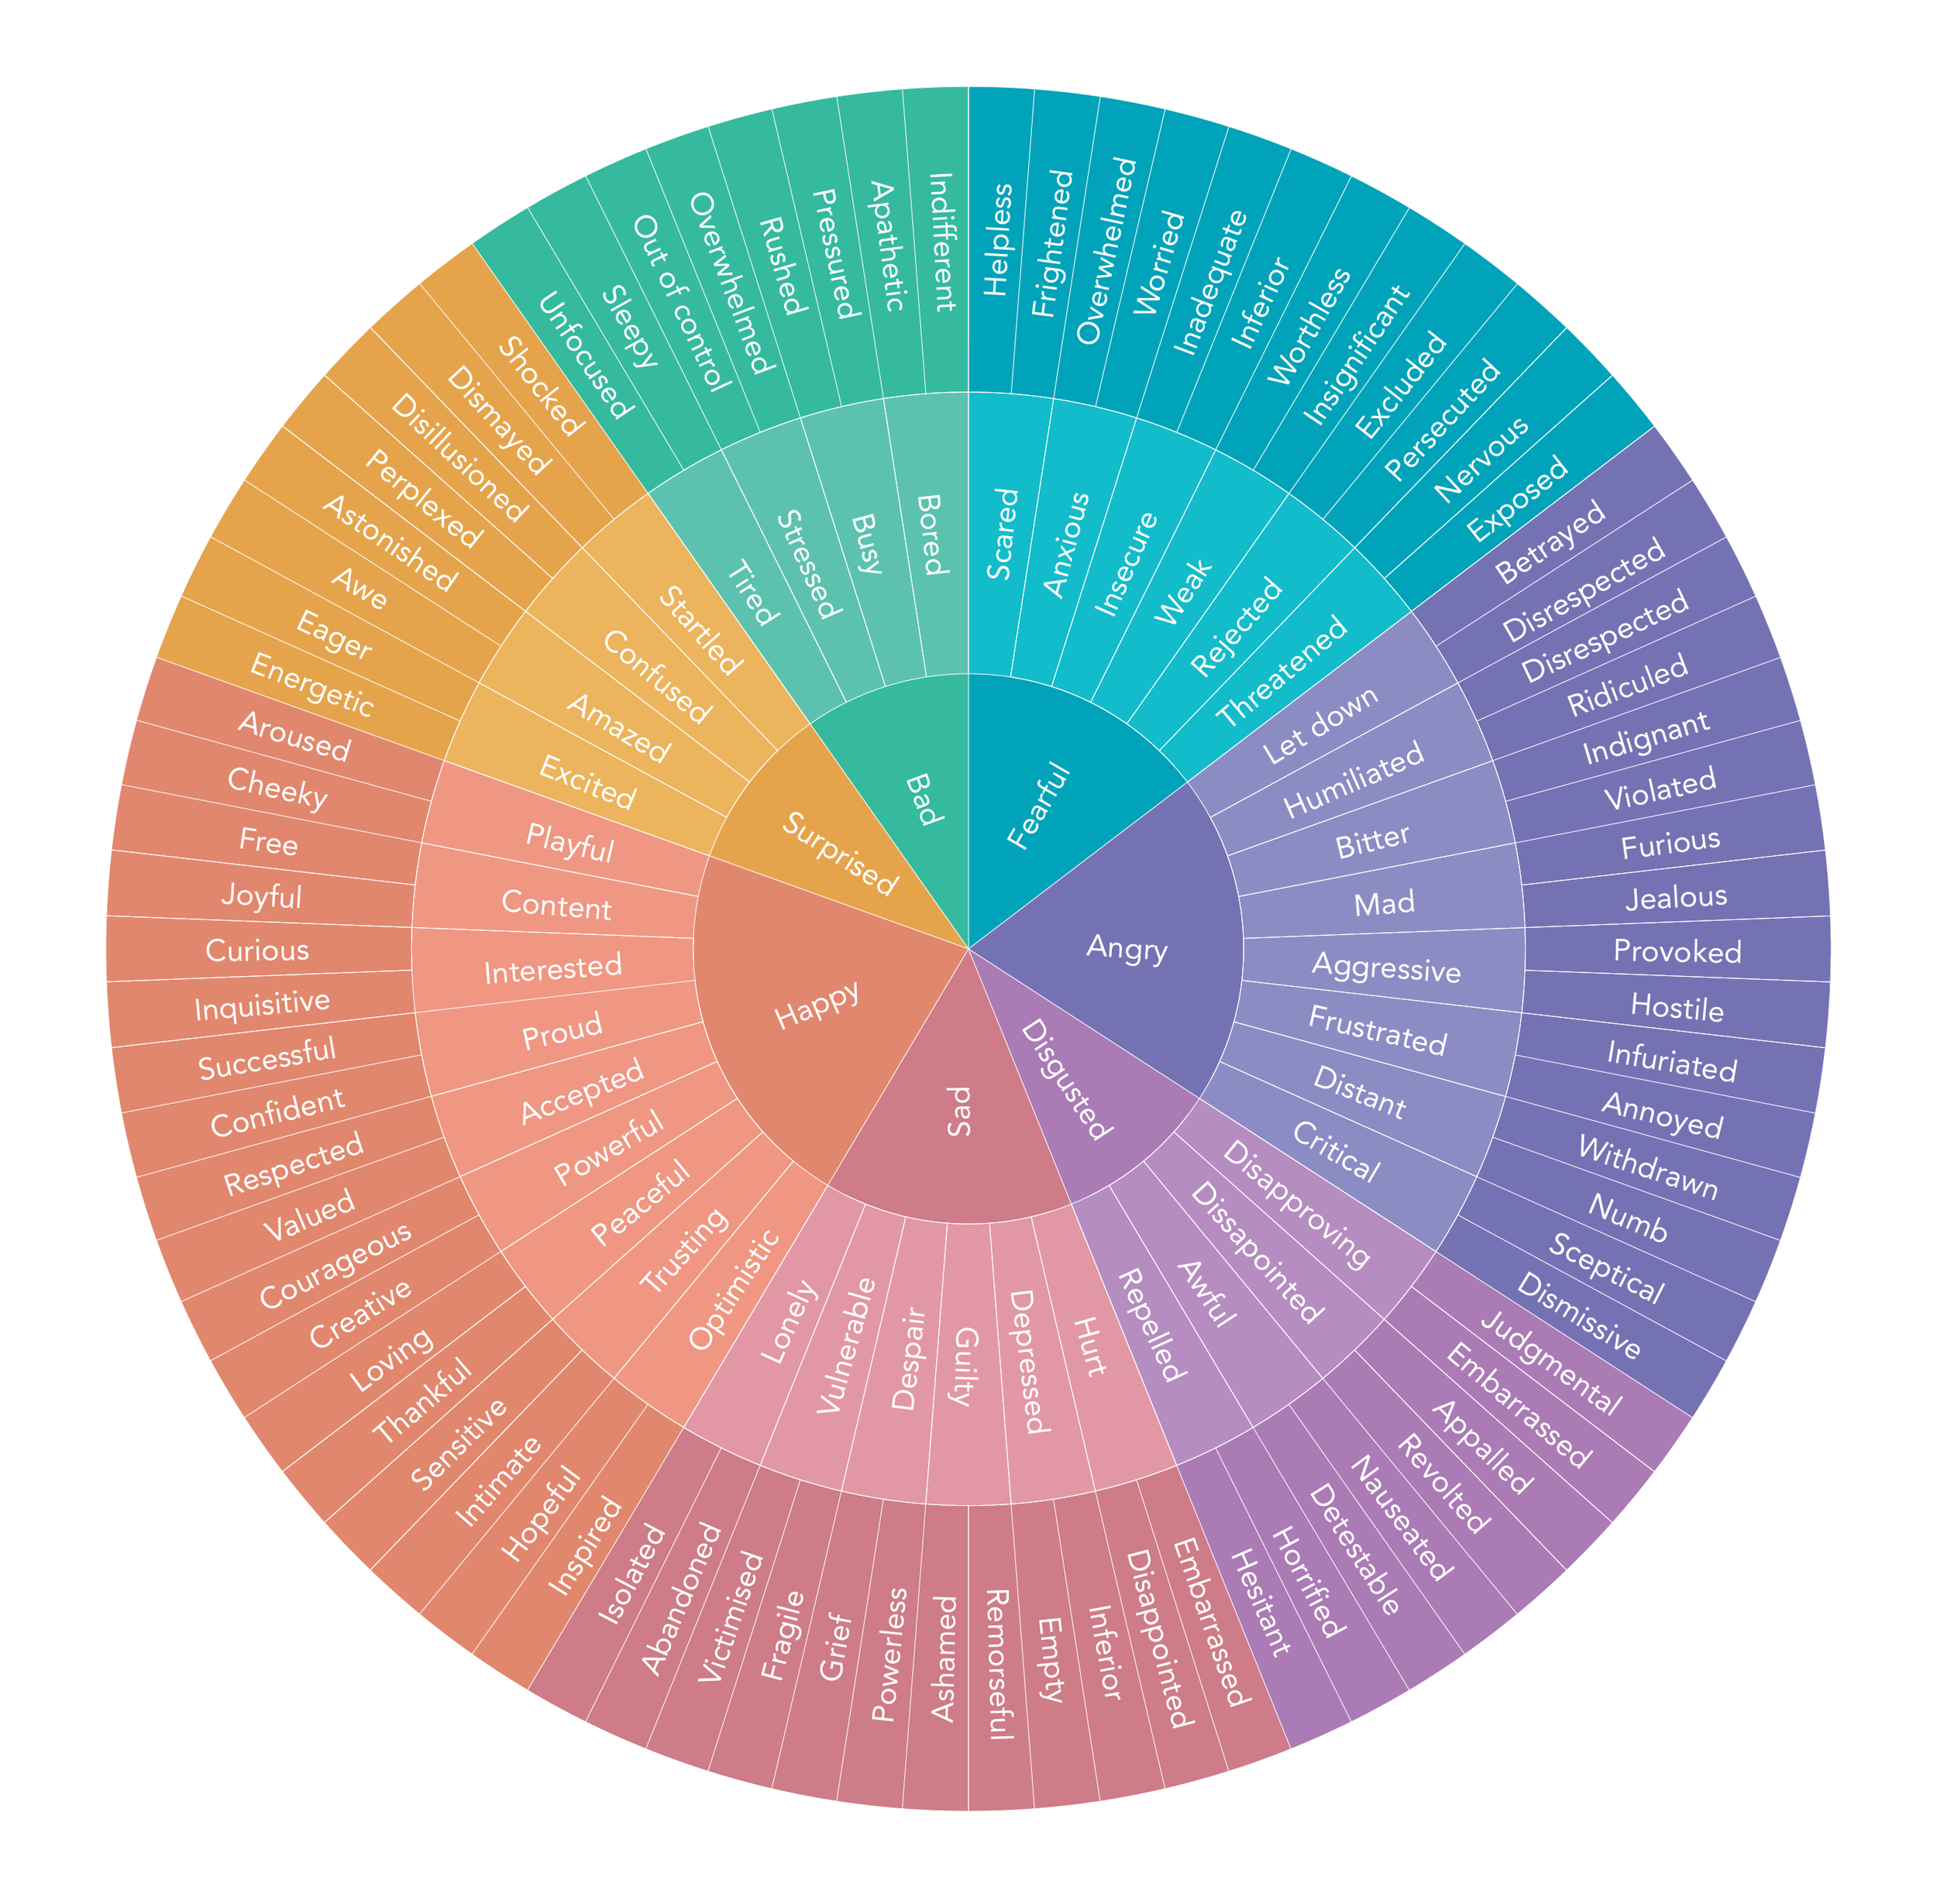 the-feelings-wheel-unlock-the-power-of-your-emotions-calm-blog